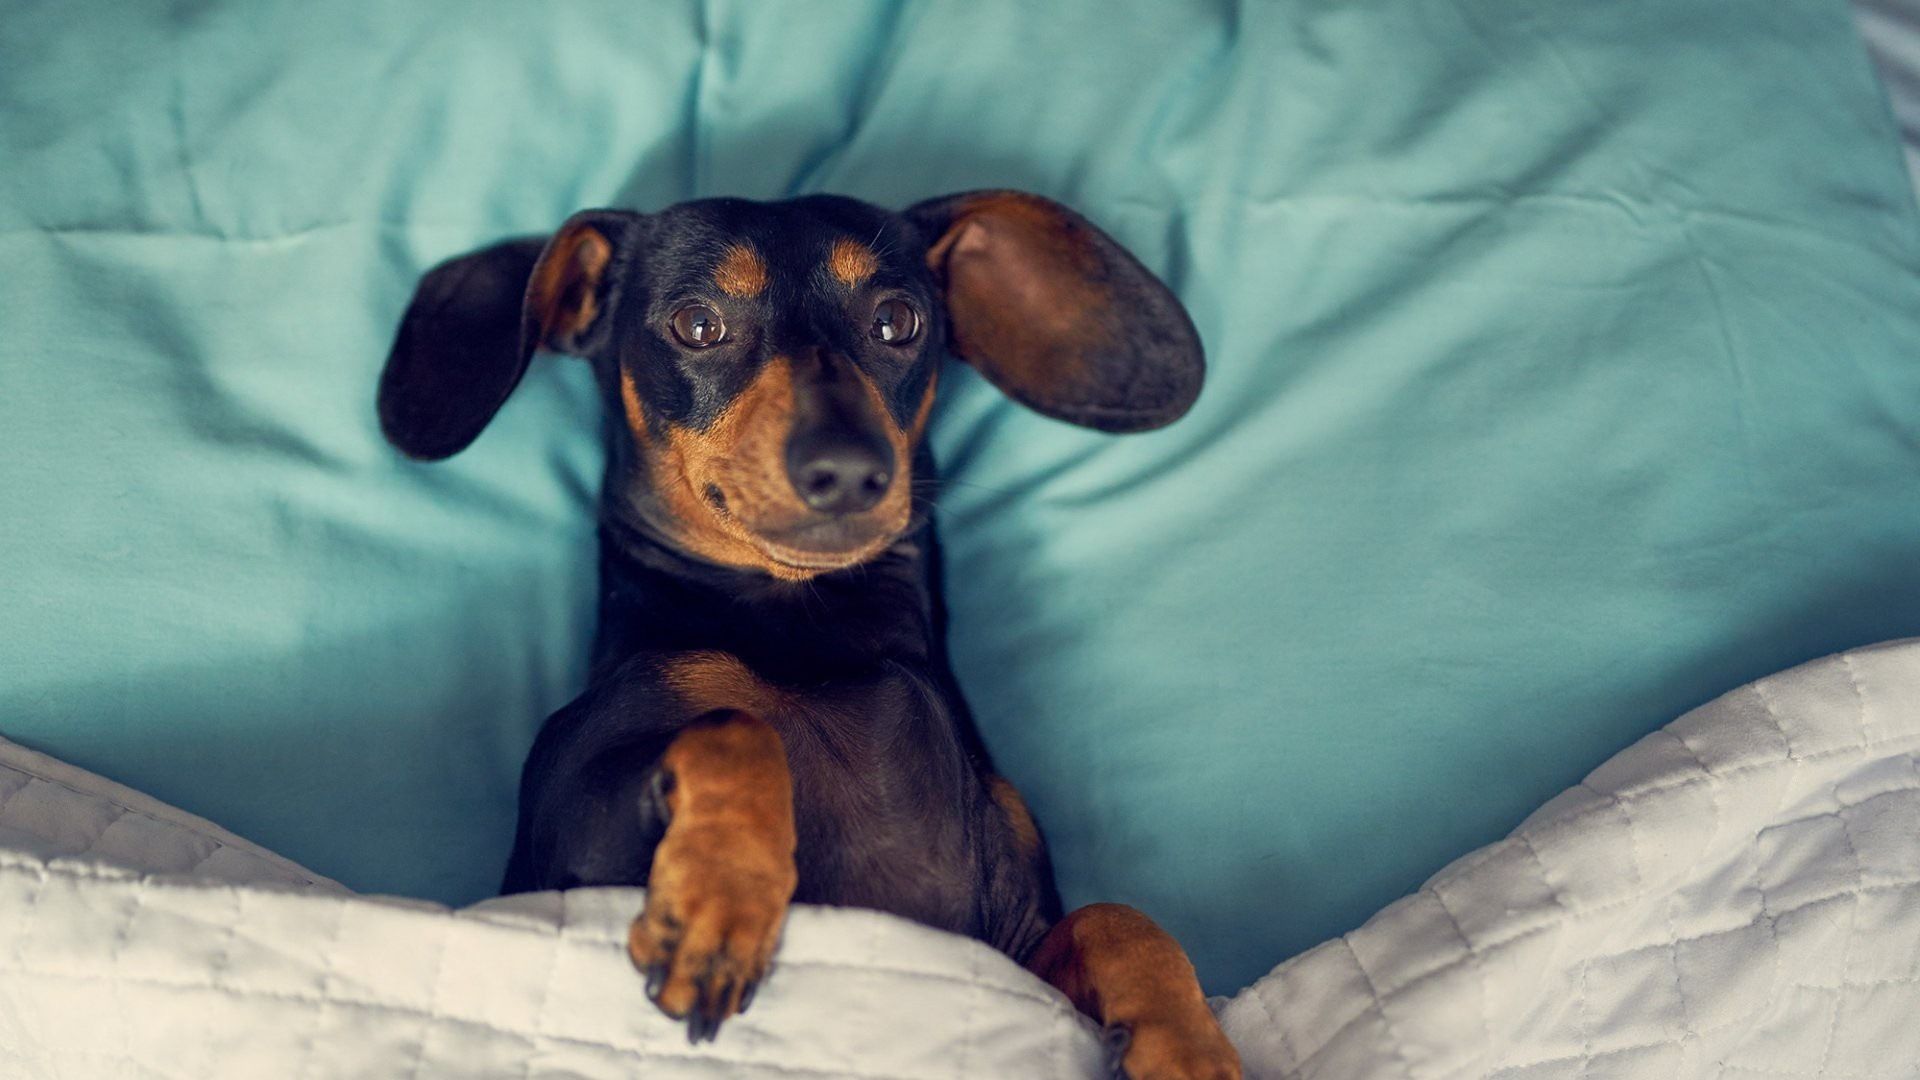 Wallpaper Dachshund, dog, sleep in bed 1920x1200 HD Picture, Image